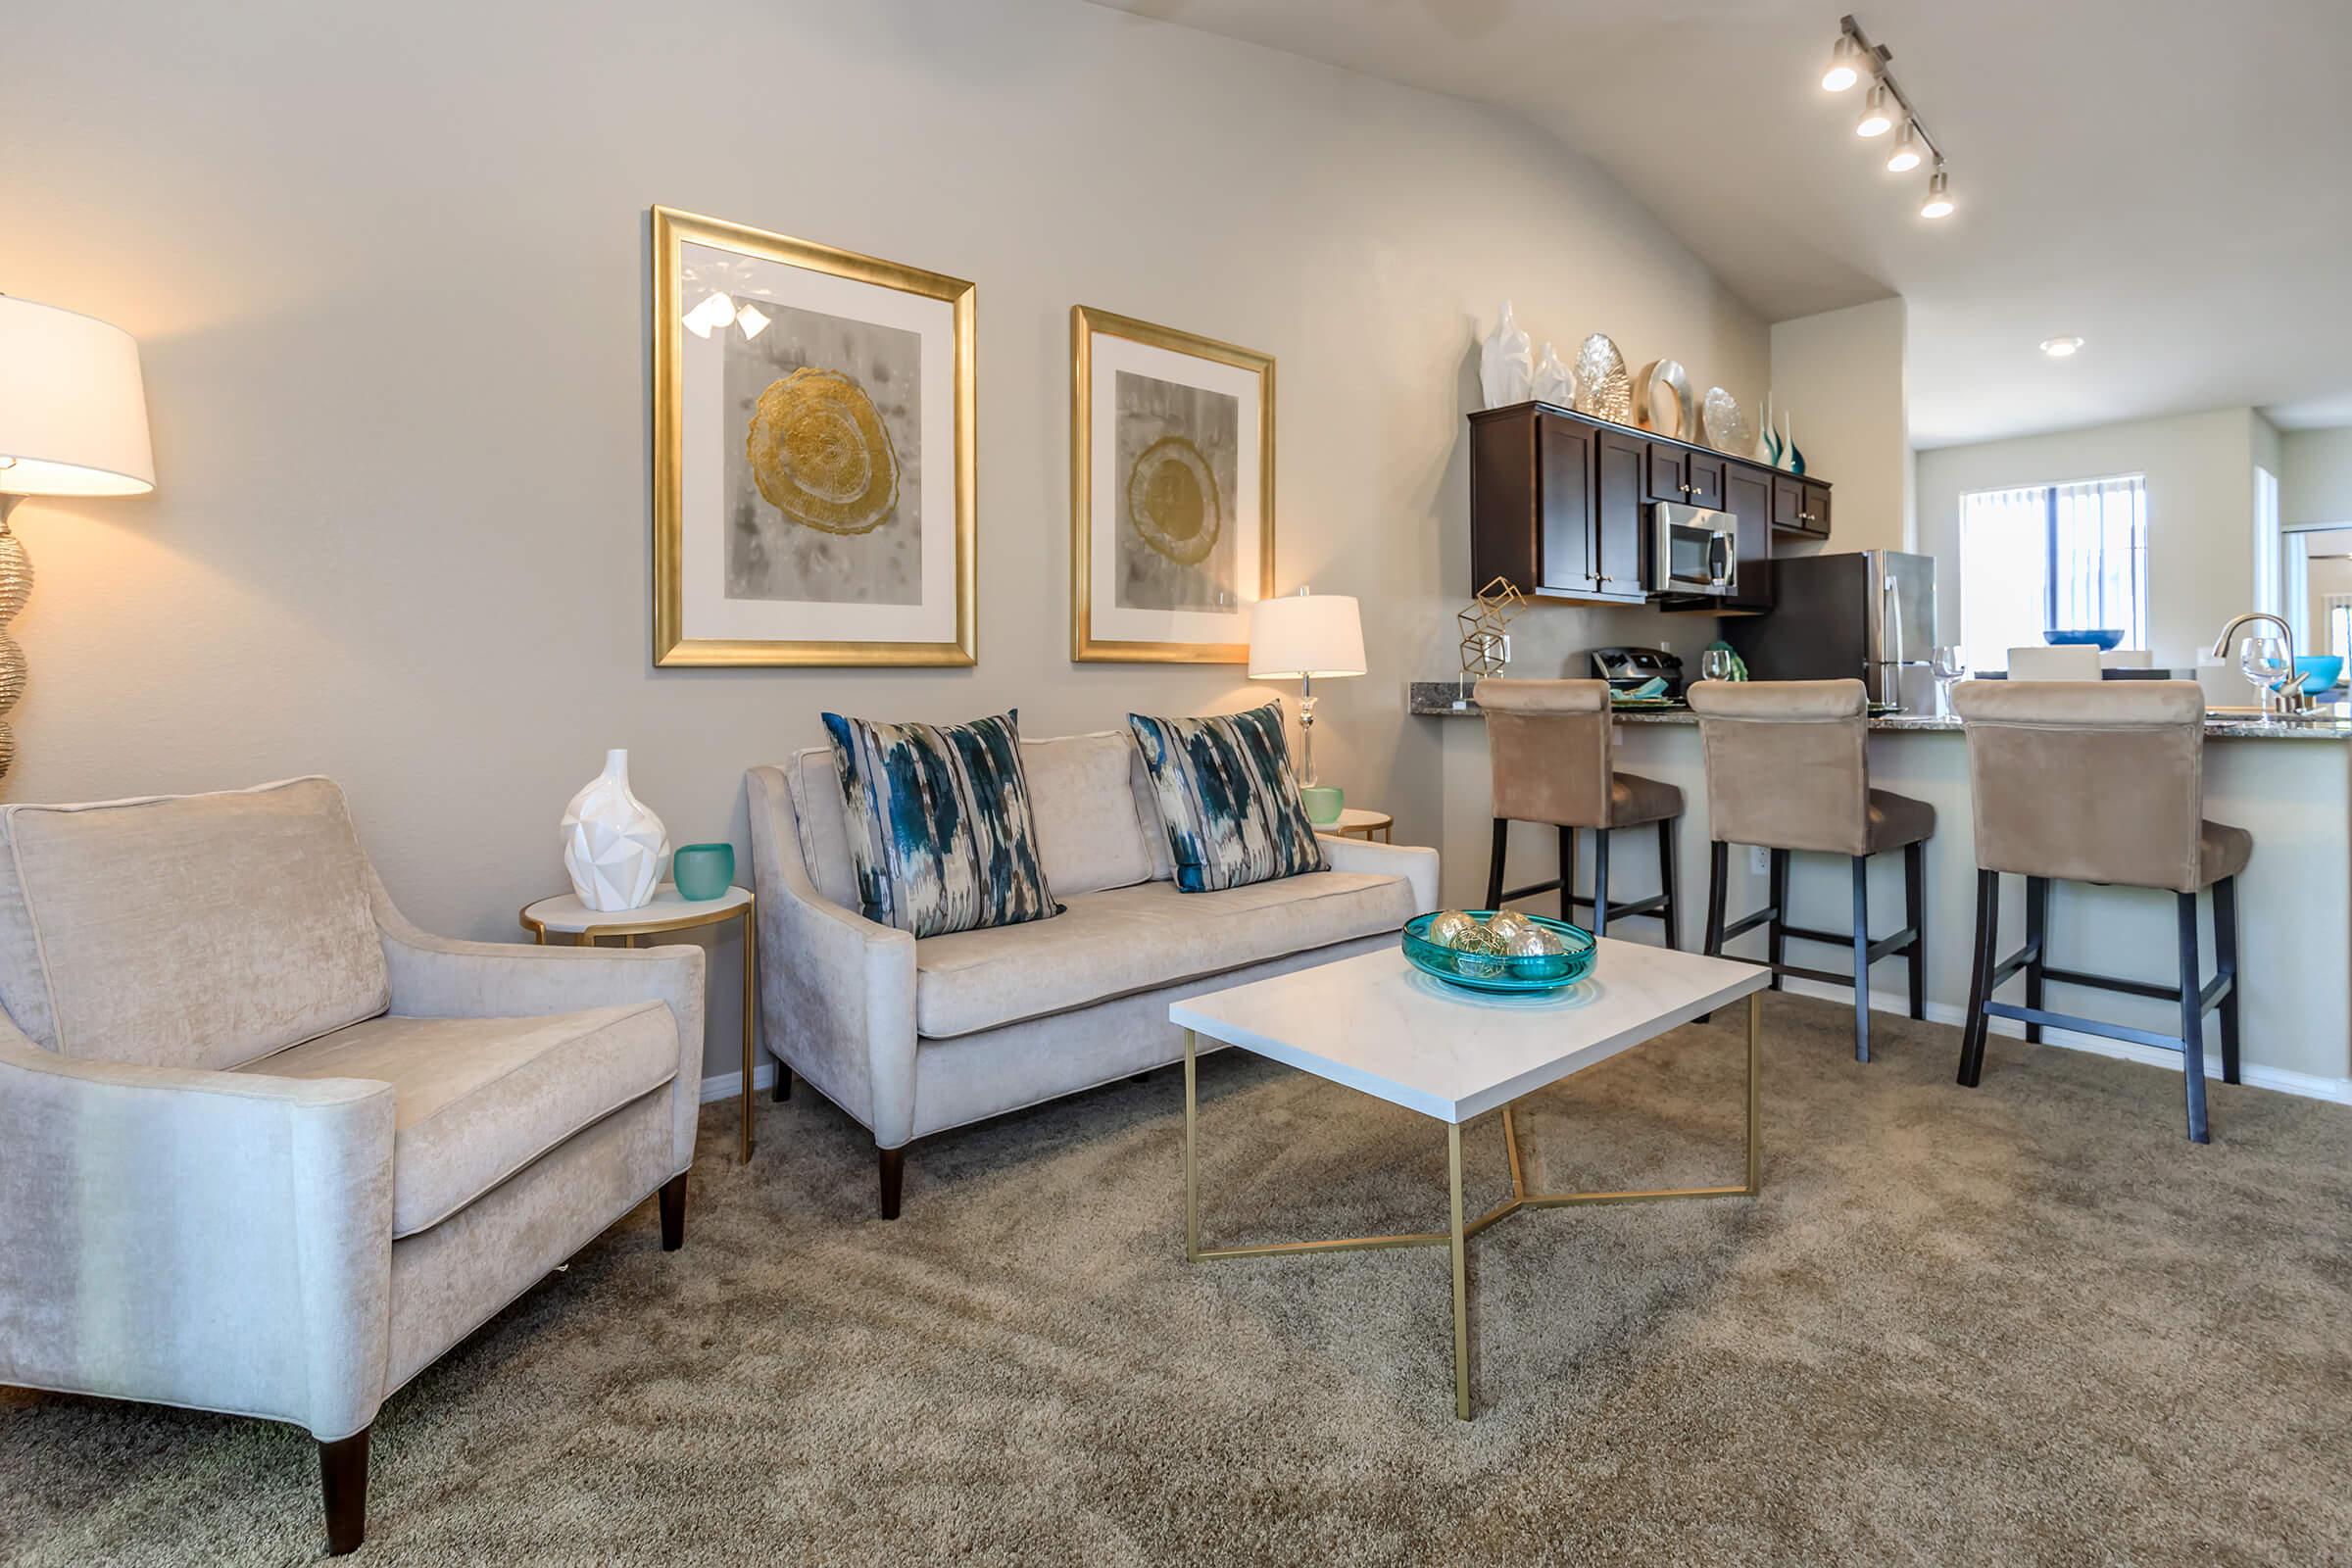 YOUR NEW LIVING ROOM AT THE CANTERA APARTMENTS BY PICERNE